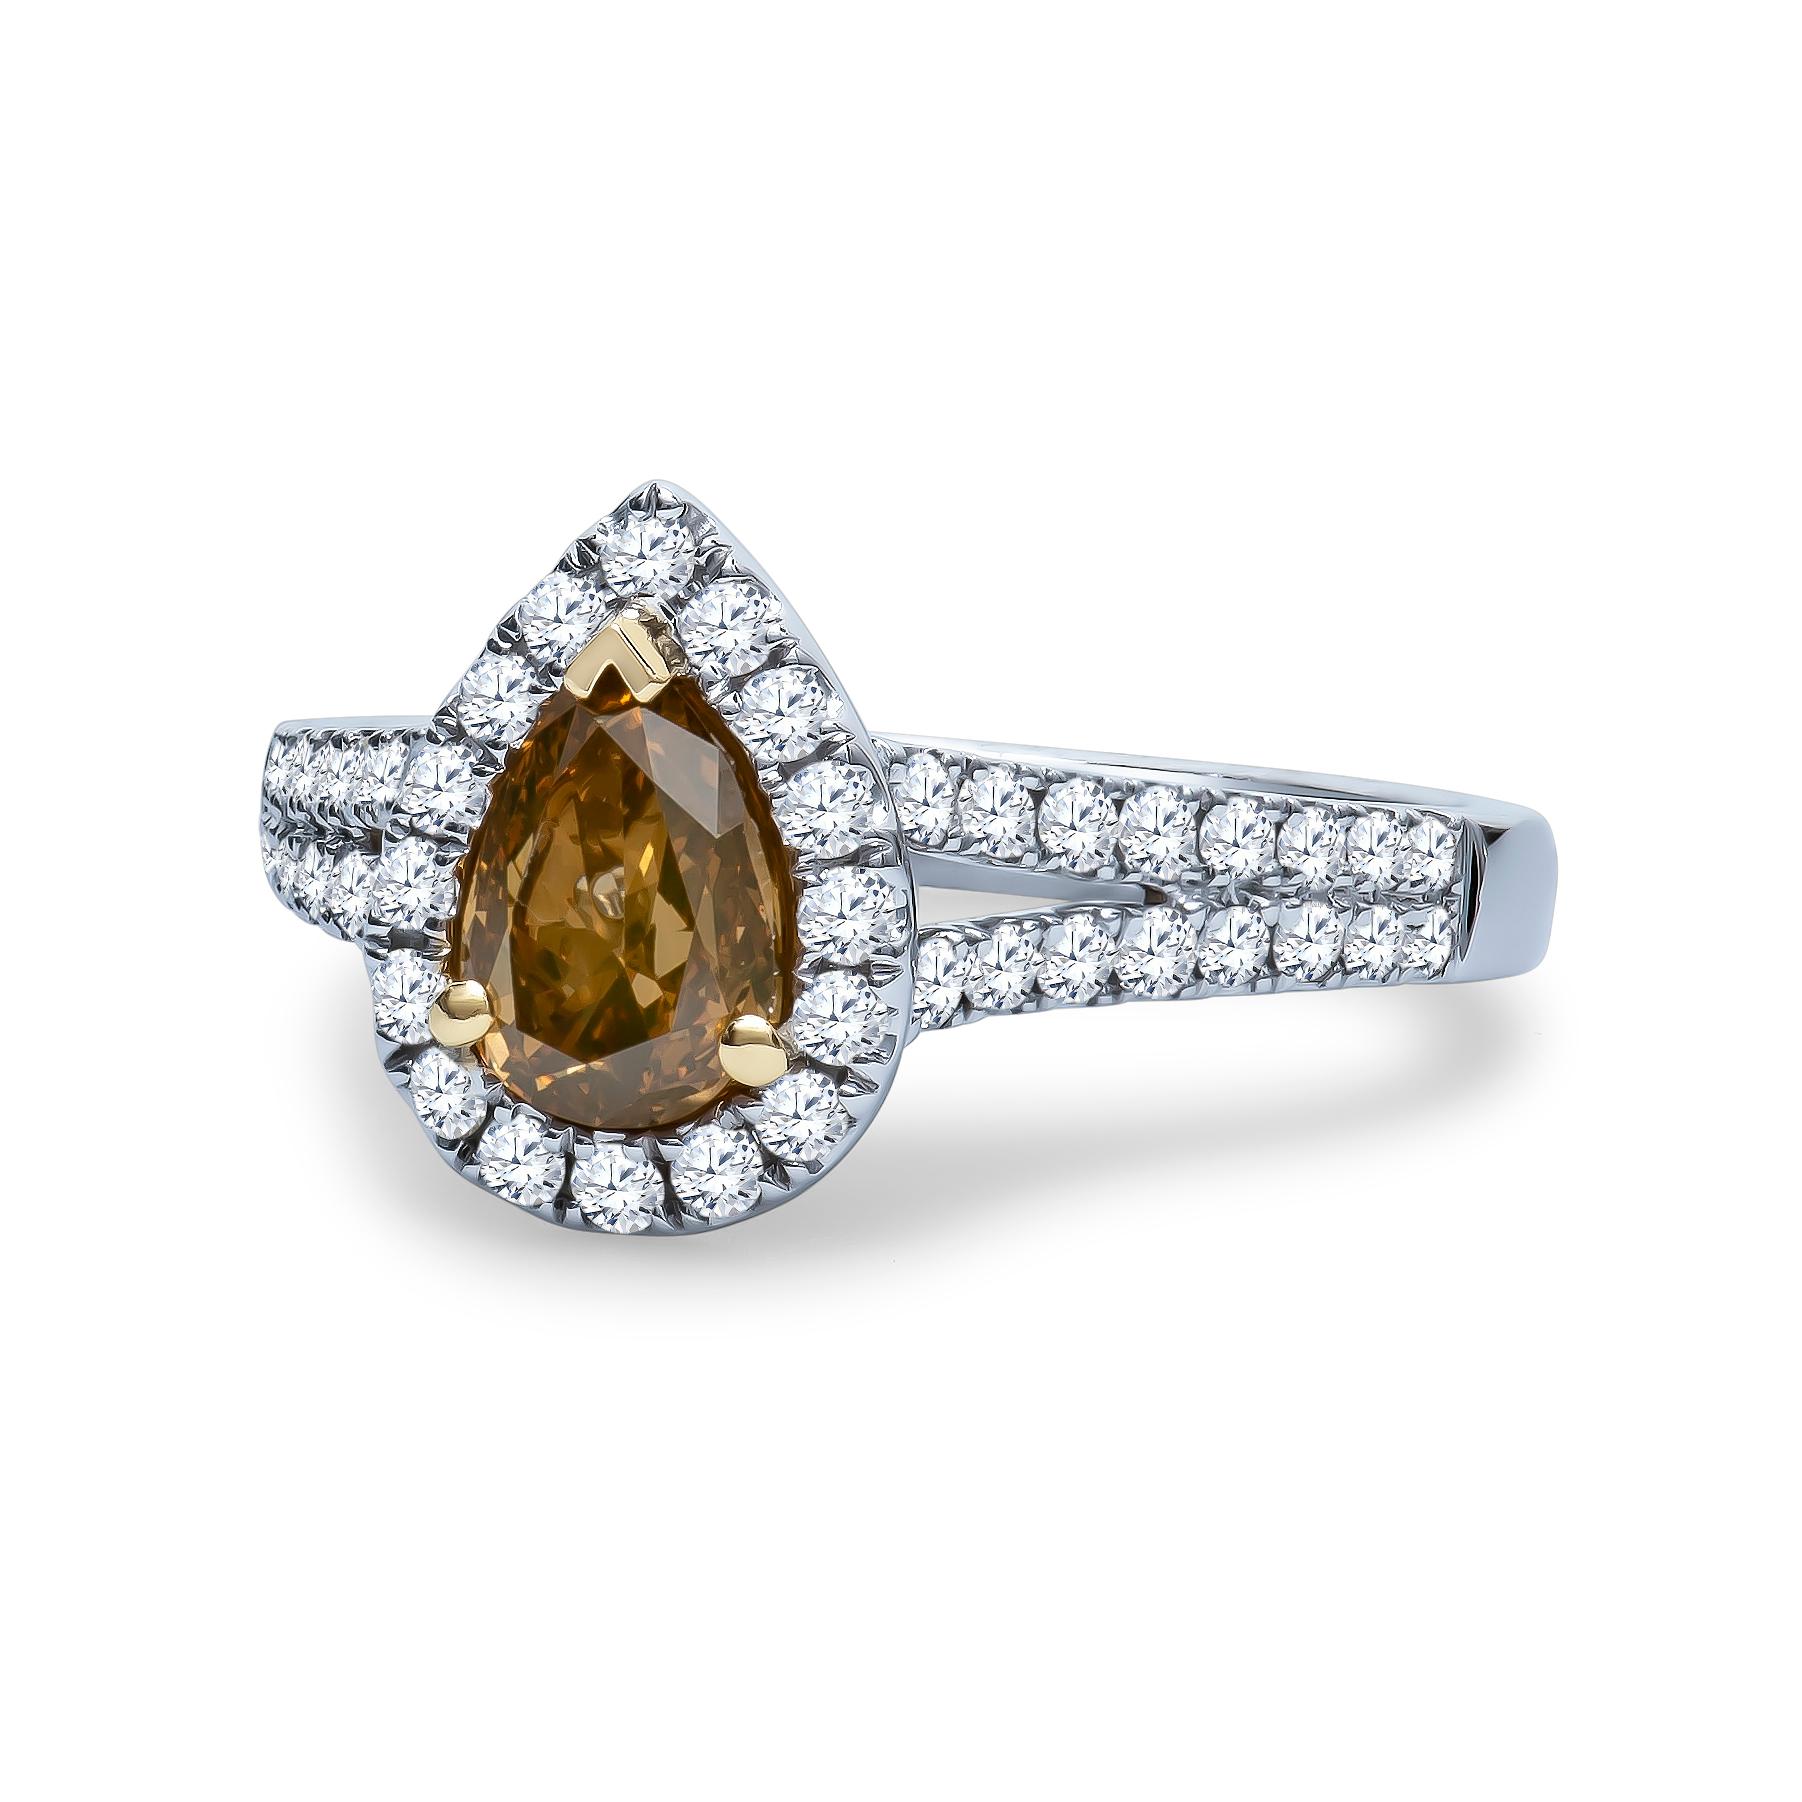 1.00 Carat pear shape fancy brownish, yellow color center diamond with 0.54 carats total in pave-set round diamonds set in an 18K white gold halo engagement ring. Ring size 6.5, may be resized to larger or smaller upon request. 

Diamond Quality: 